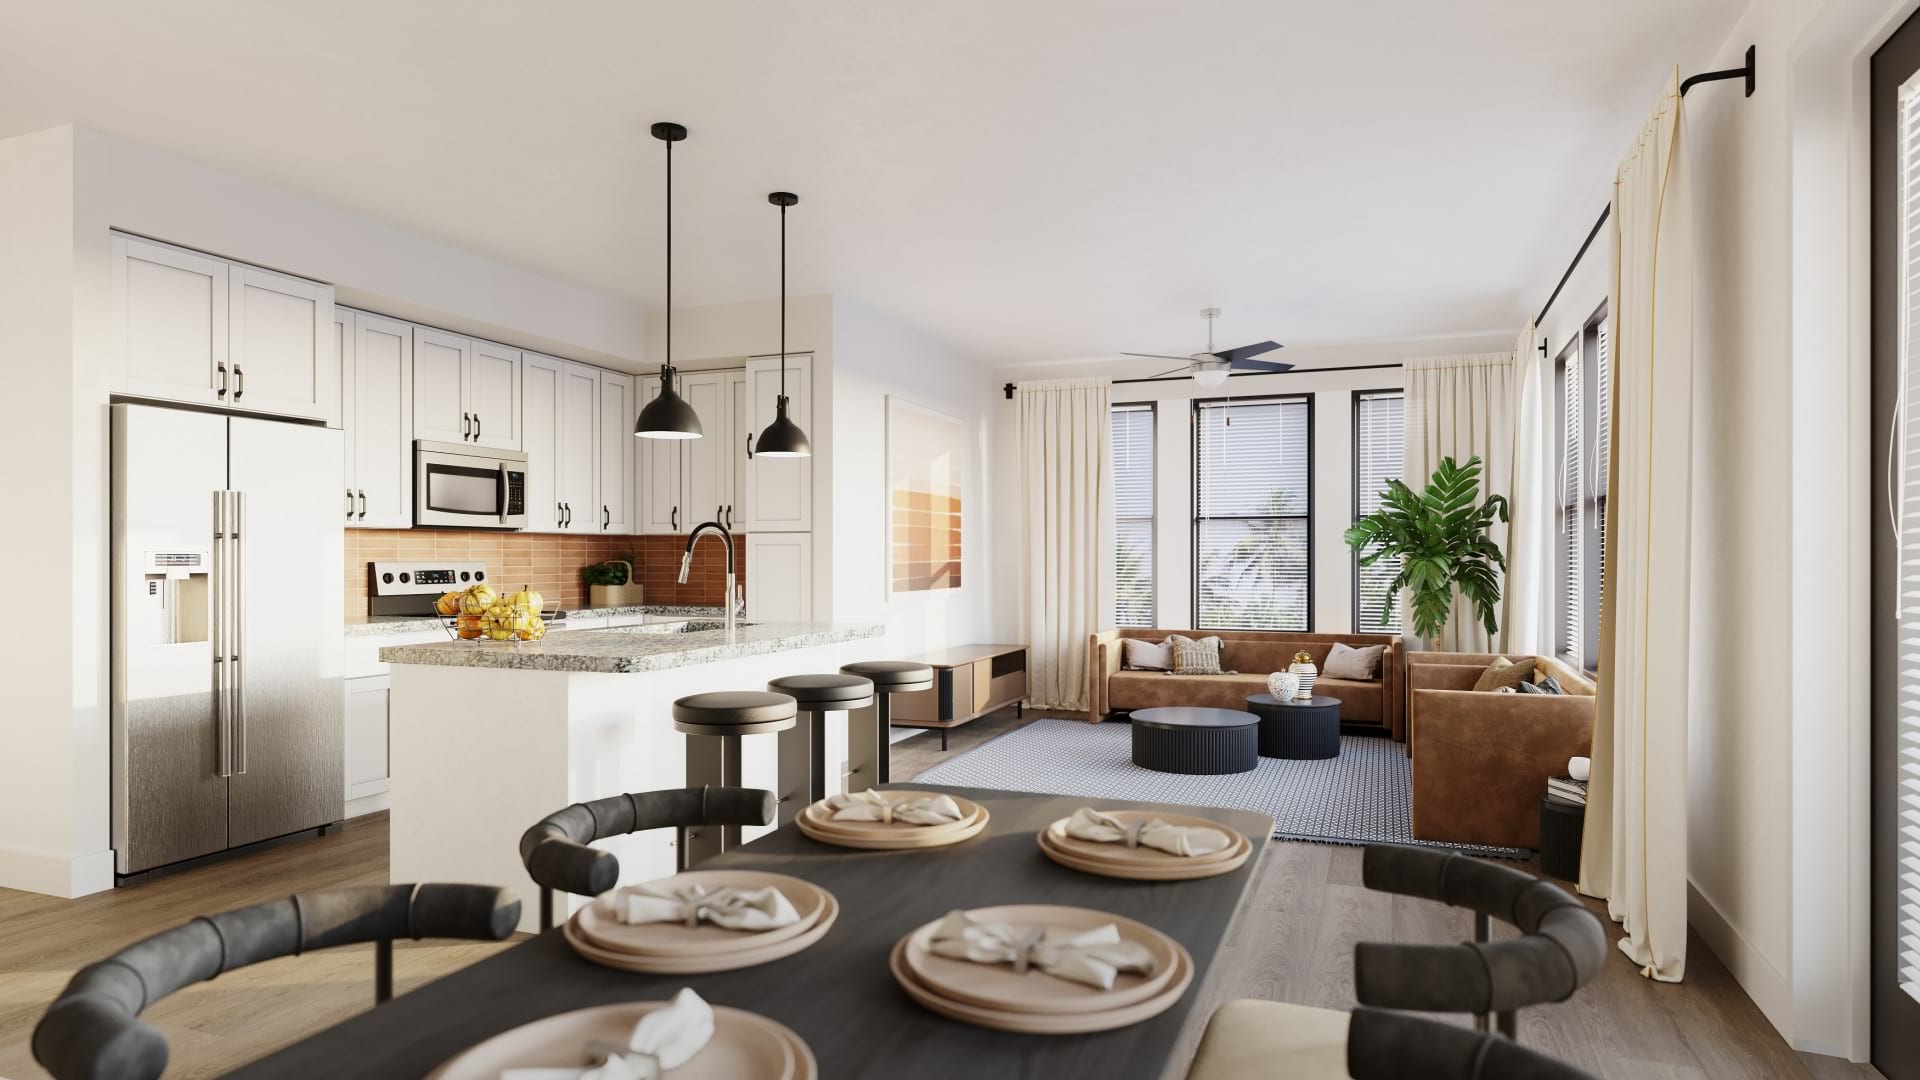 Upscale Kitchen with Luxury Appliances at Our Riverview Apartments